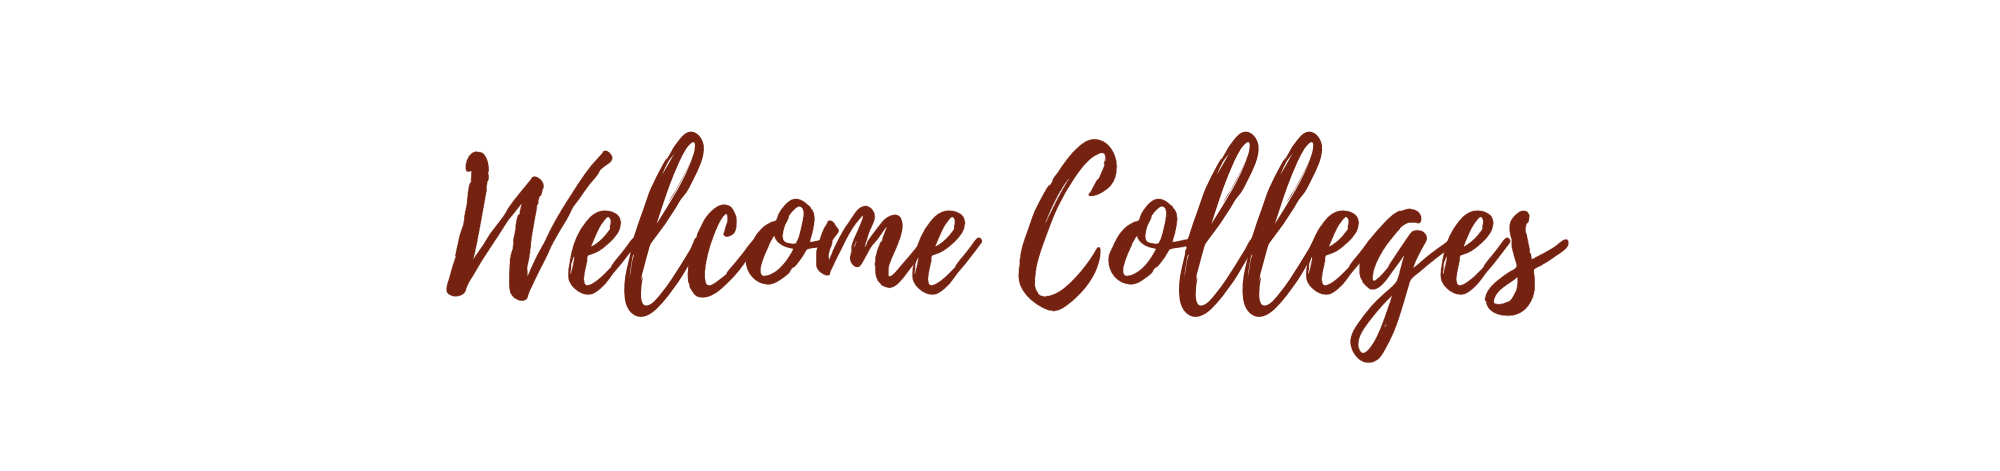 Welcome Colleges - 8.5 x 2